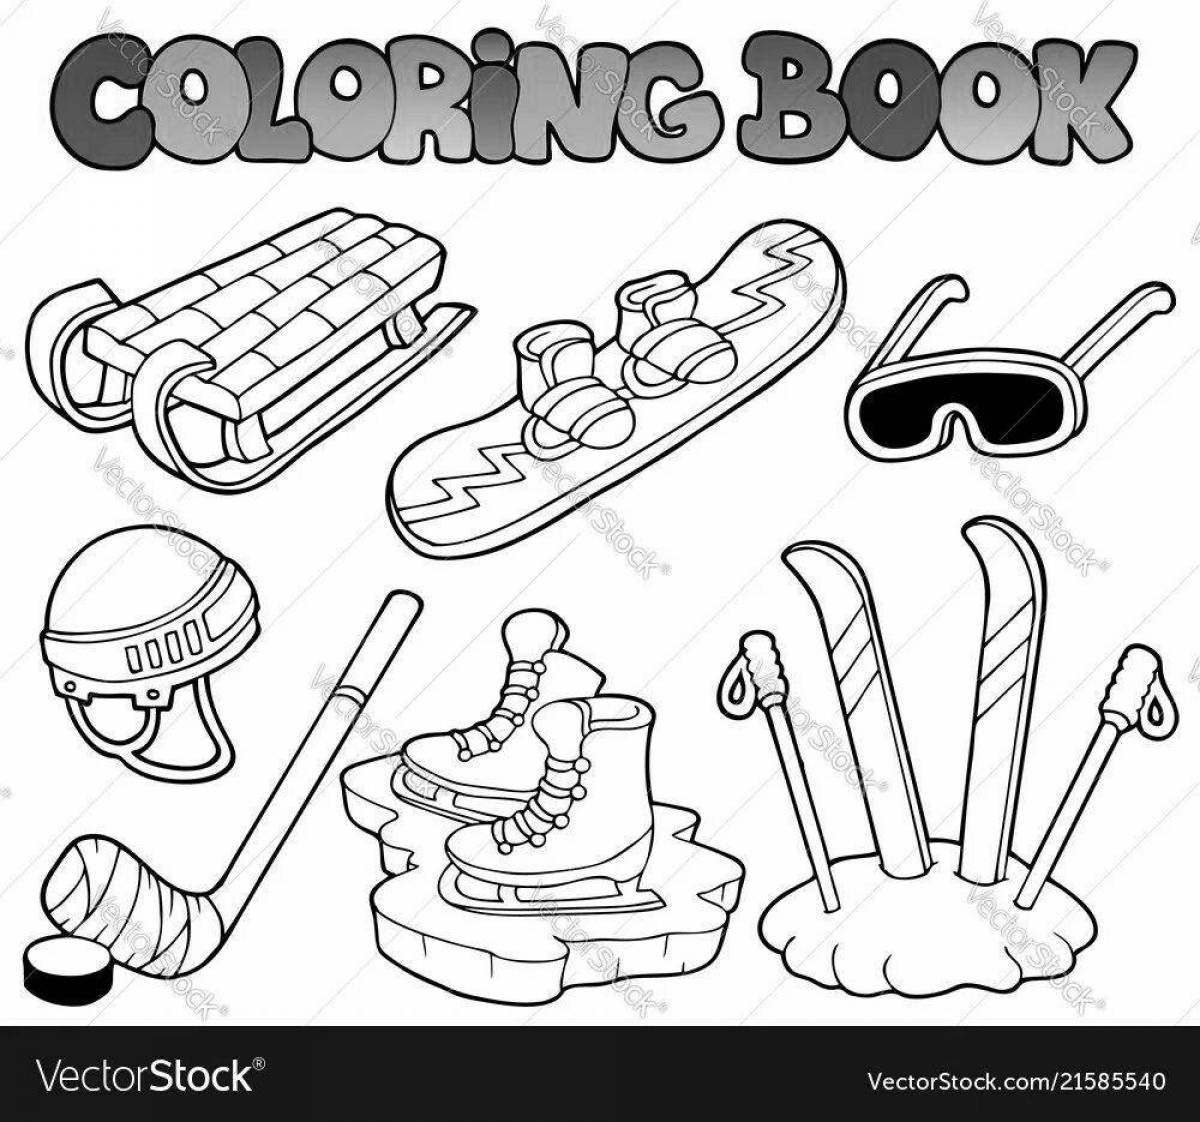 Animated skis, skates, sleds, coloring book